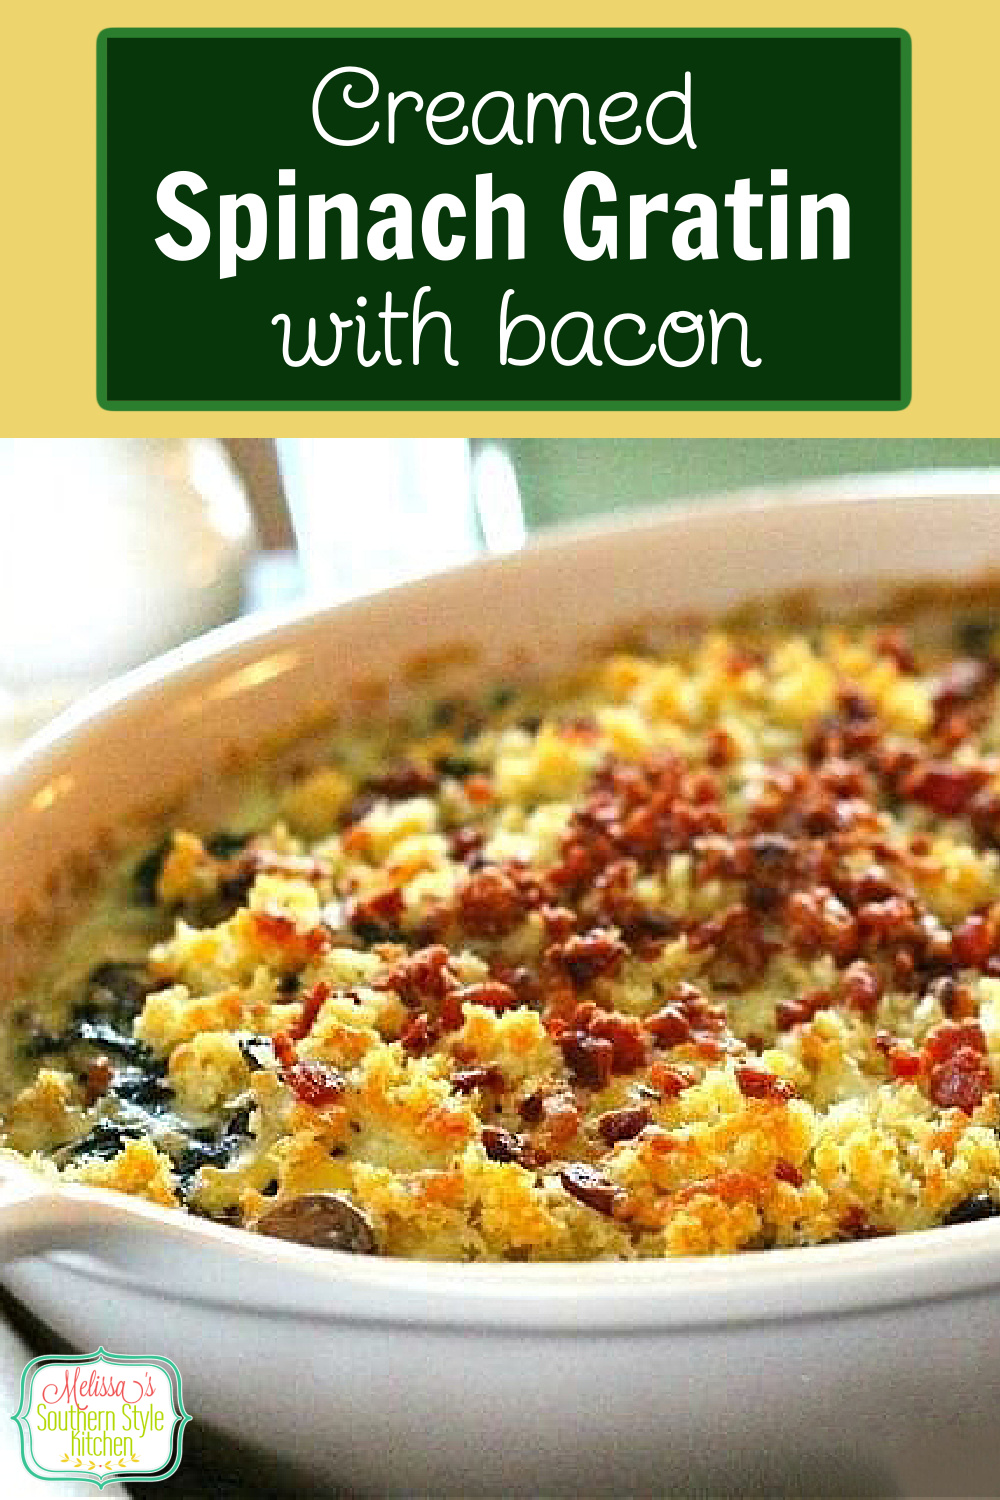 This Creamed Spinach Gratin with Bacon is the perfect side dish for the holidays, date night or casual entertaining with friends #creamedspinach #spinachgratin #spinachrecipes #spinachcasserole #bacon #mushrooms #spinach #christmasrecipes #thansgivingrecipes